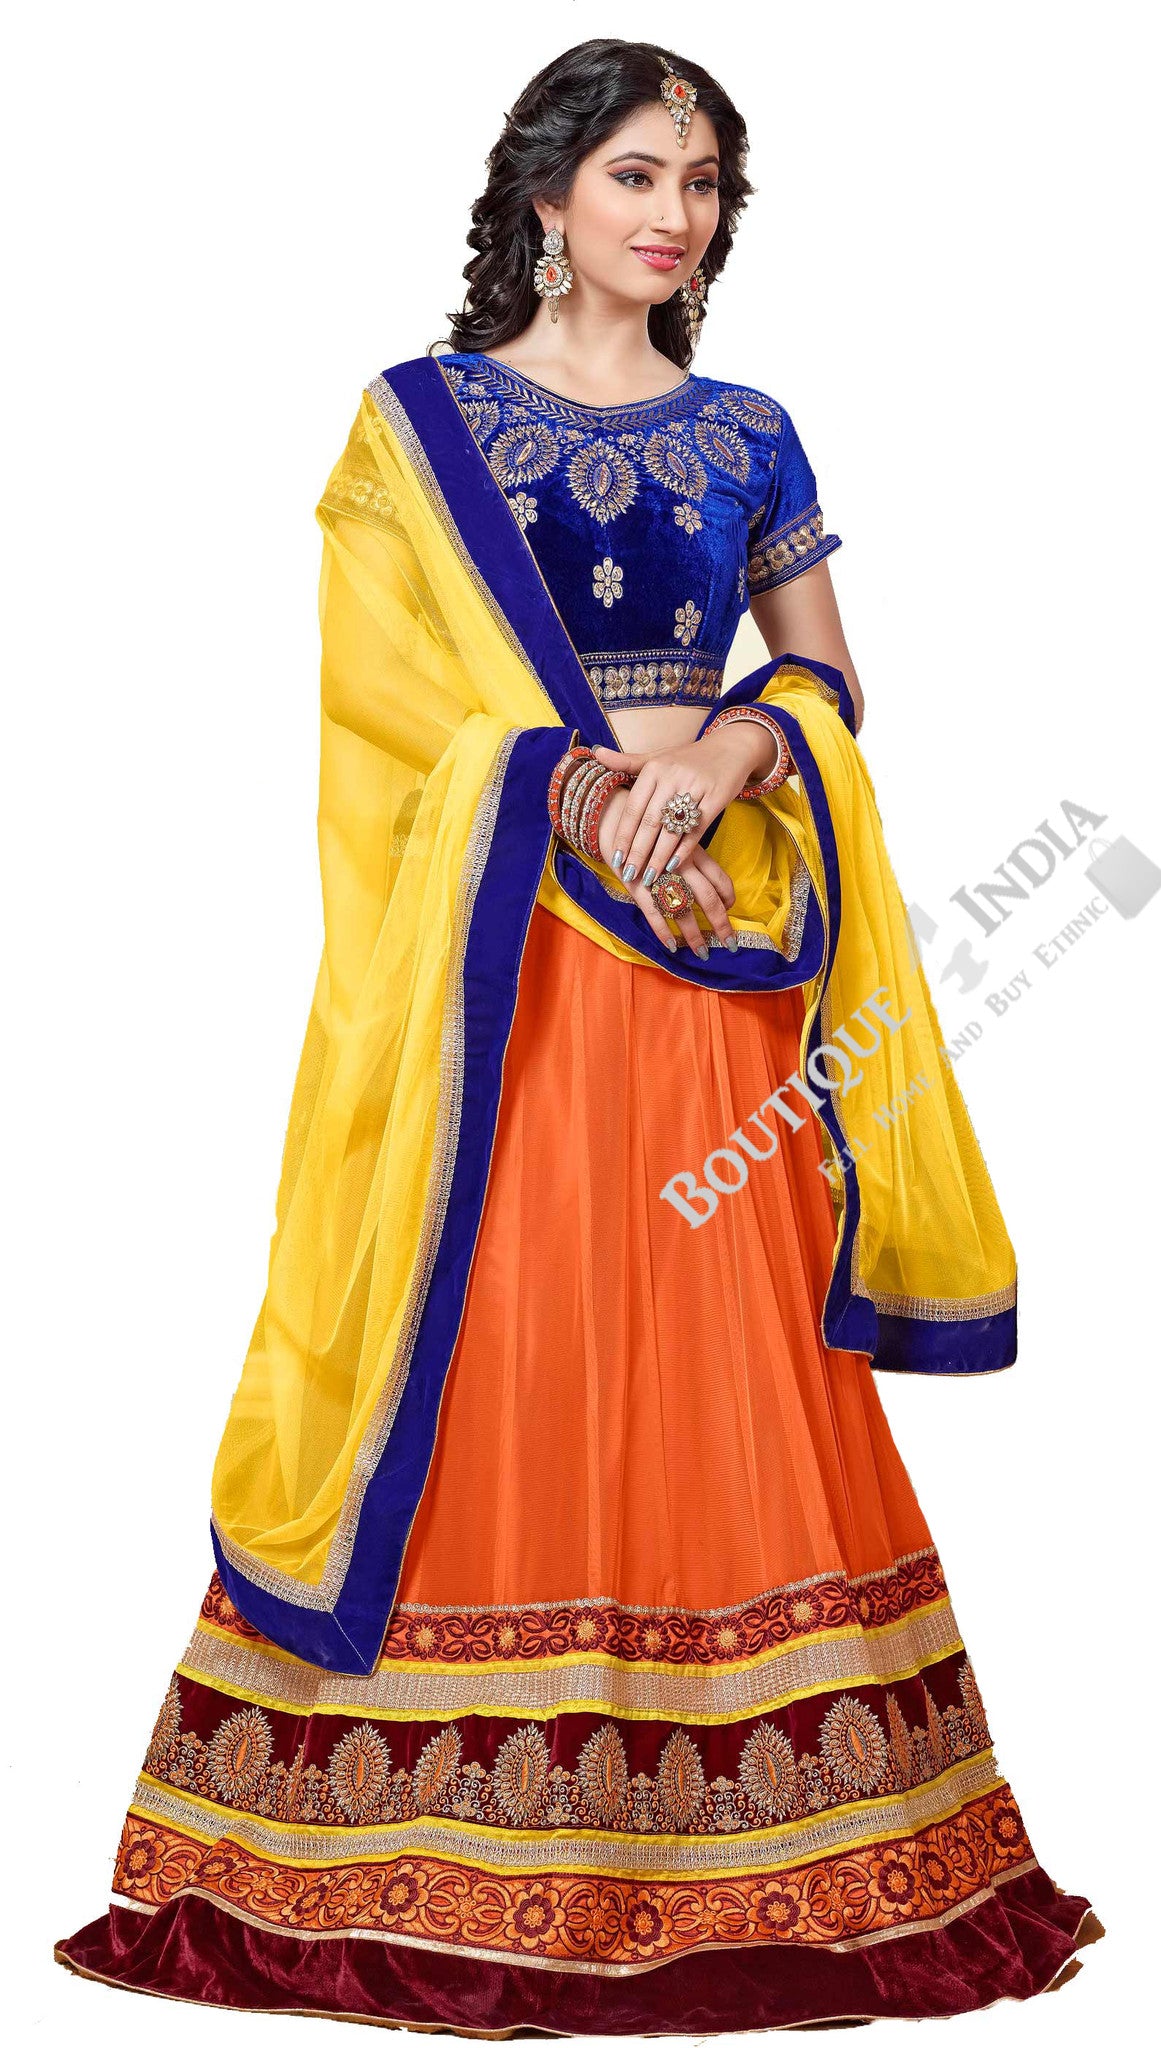 Lehenga - Attractive Heavy Work Designer Lehenga Collection - Velvet Blue, Orange And Brown Most Beautiful 3 Piece Semi Stitched Lehenga Collection For Party / Wedding / Special Occasions - Semi Stitched, Blouse - Ready to Stitch - Boutique4India Inc.